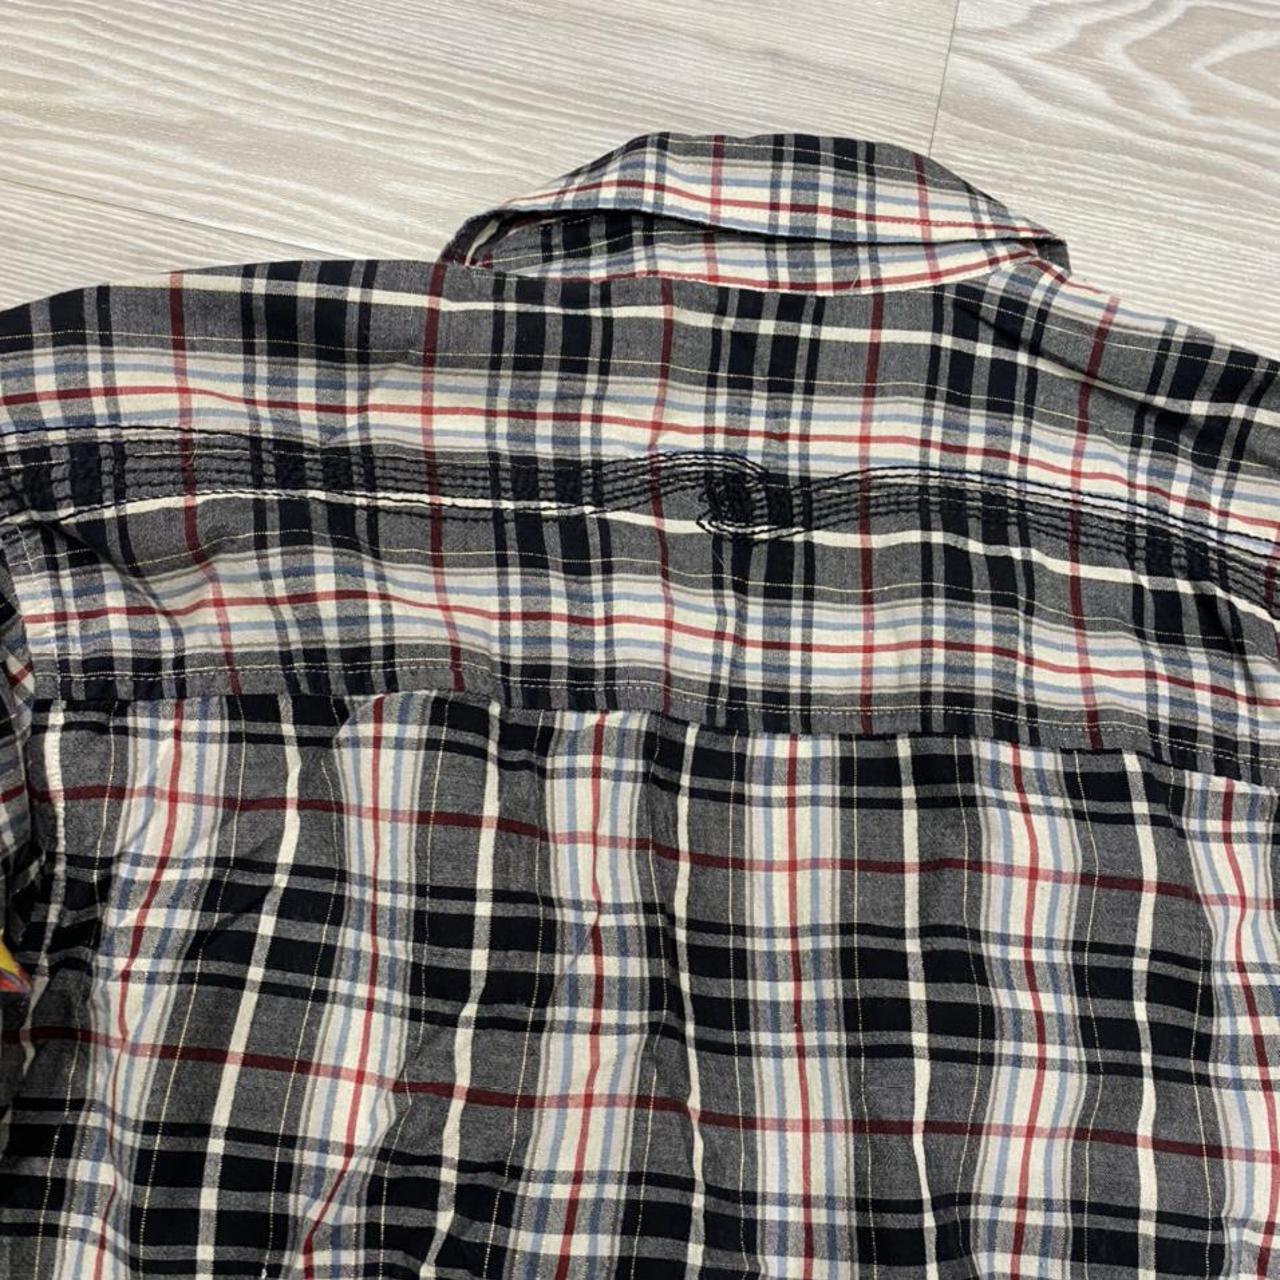 Nudie Jeans Men's Black and White Shirt (4)